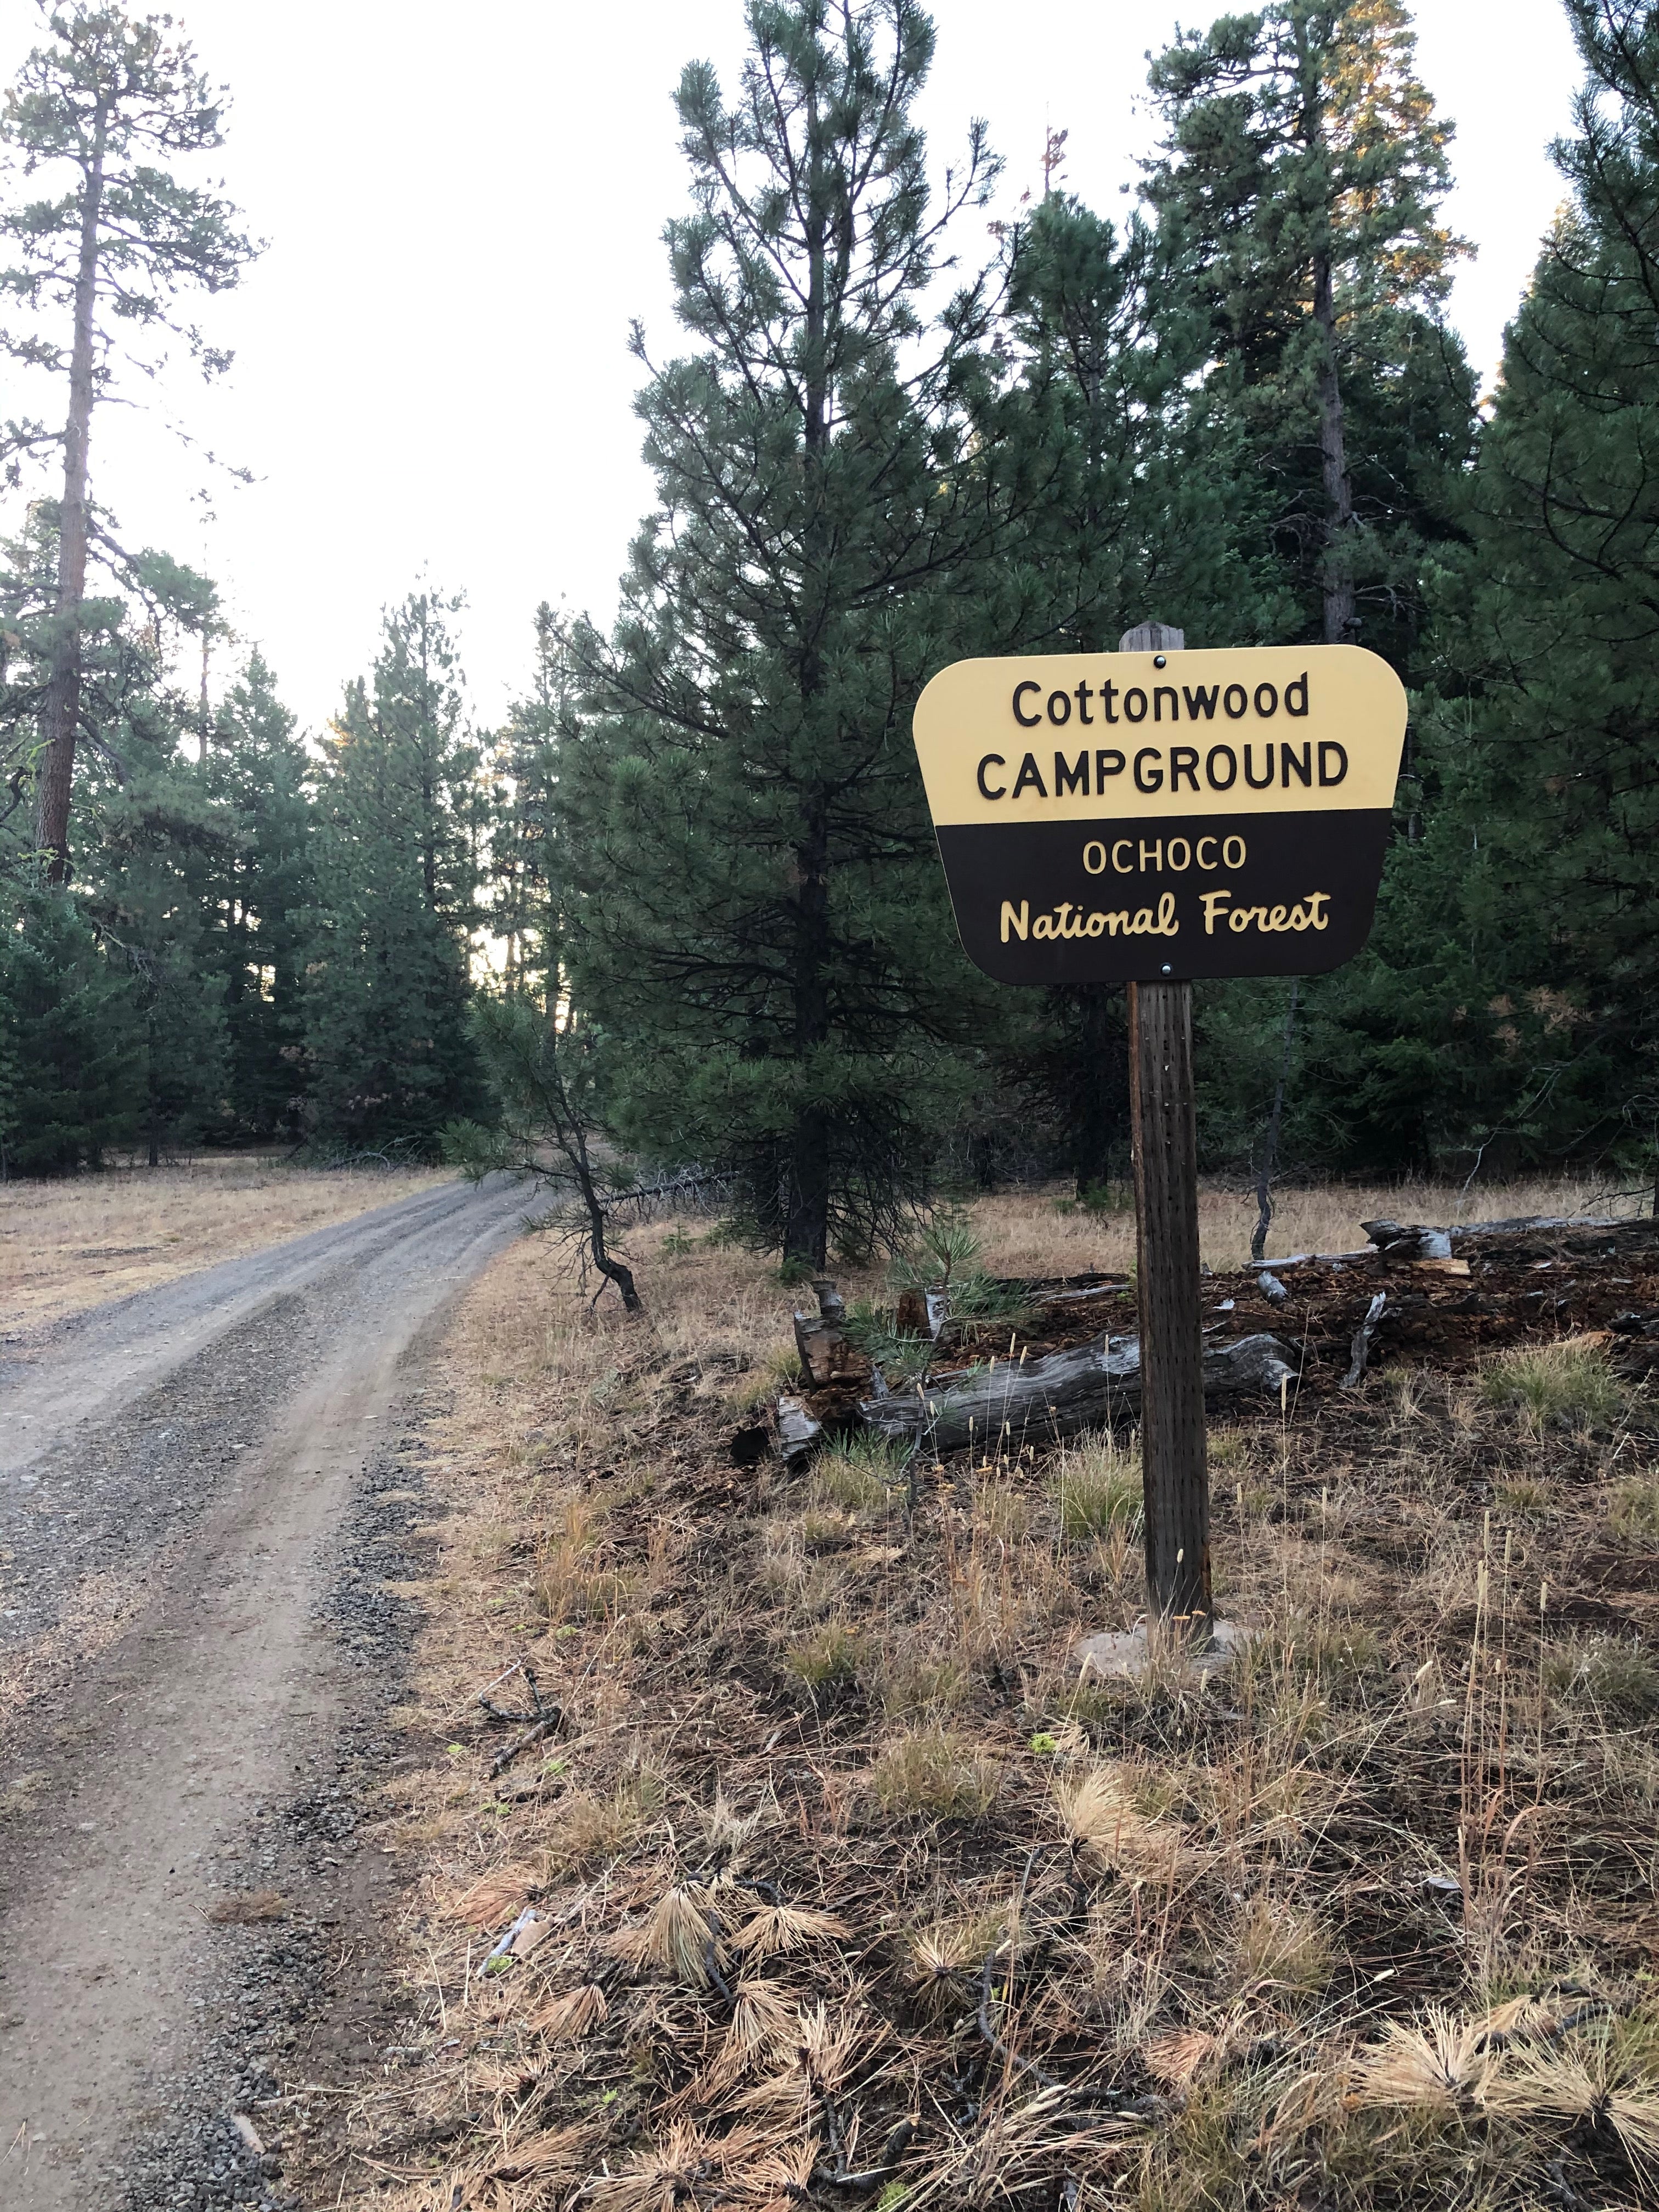 Camper submitted image from Cottonwood Campground - 4